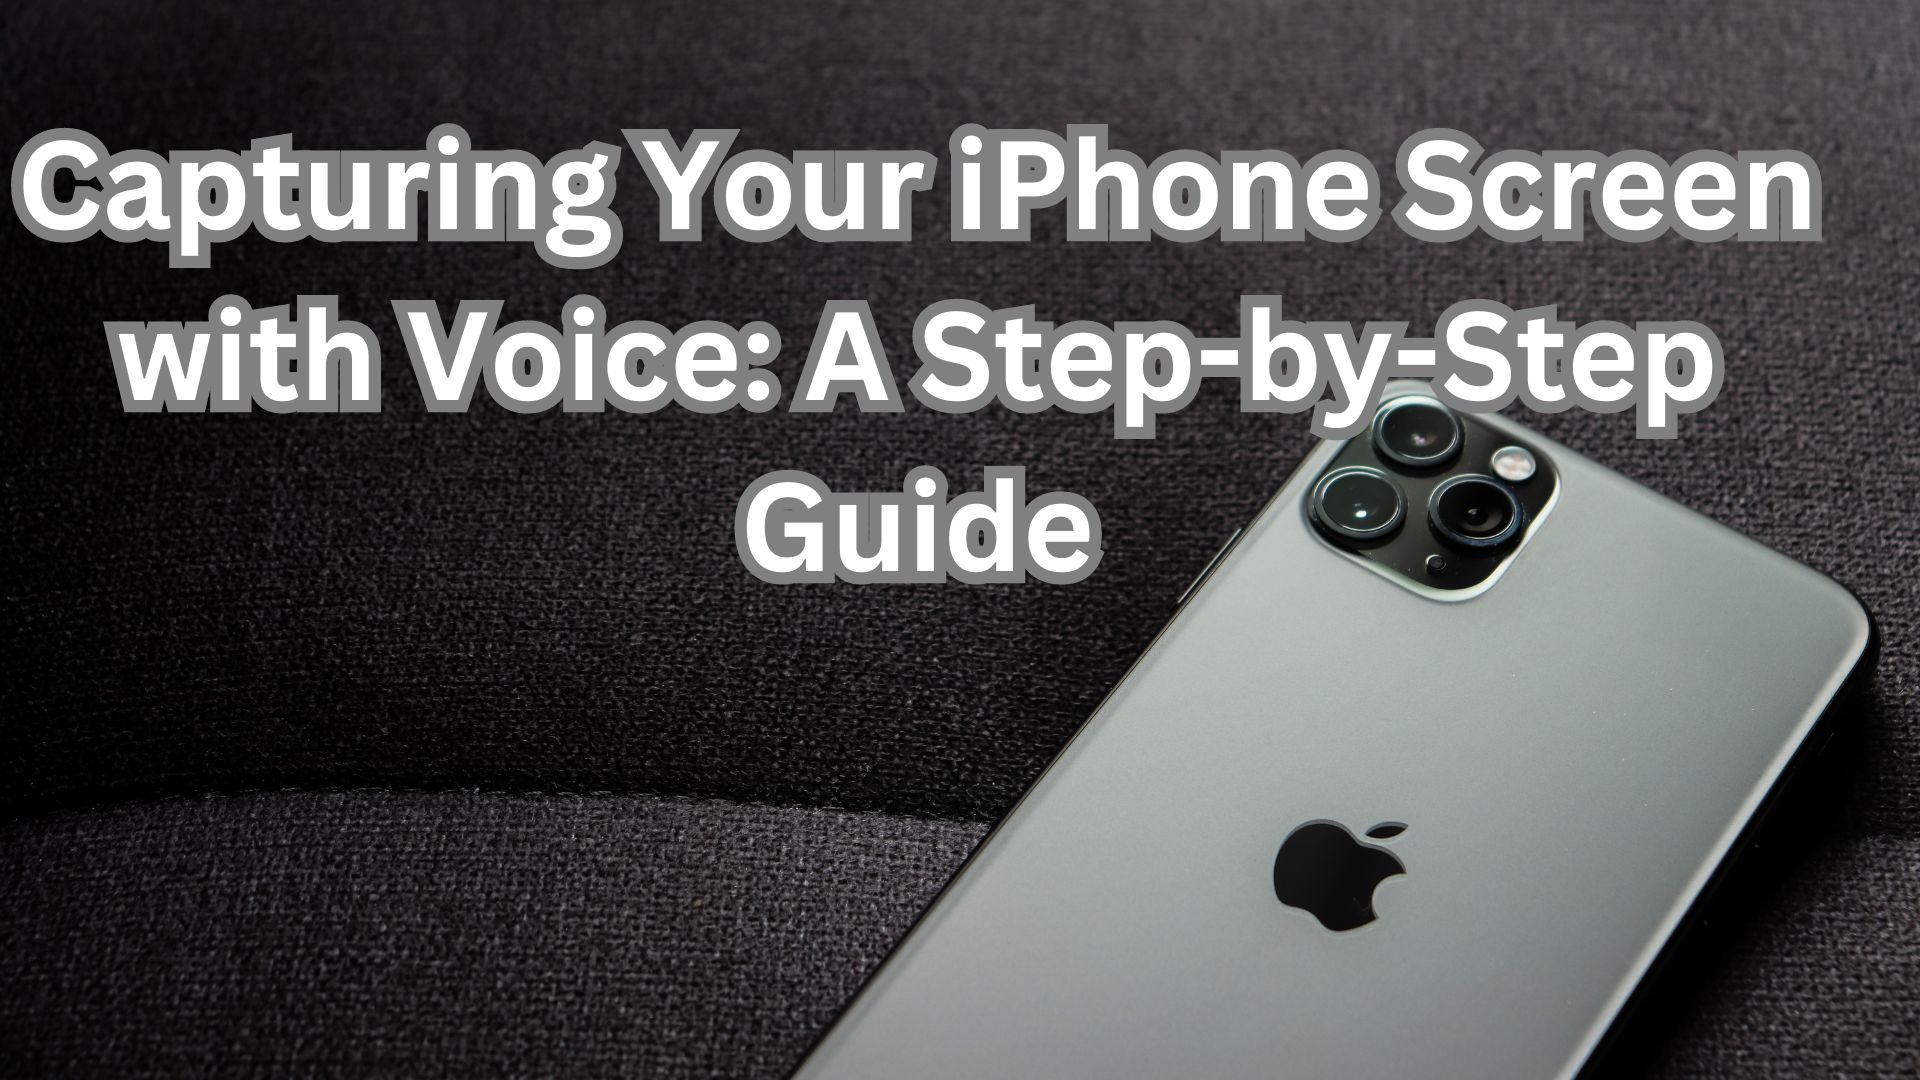 Capturing Your iPhone Screen with Voice: A Step-by-Step Guide